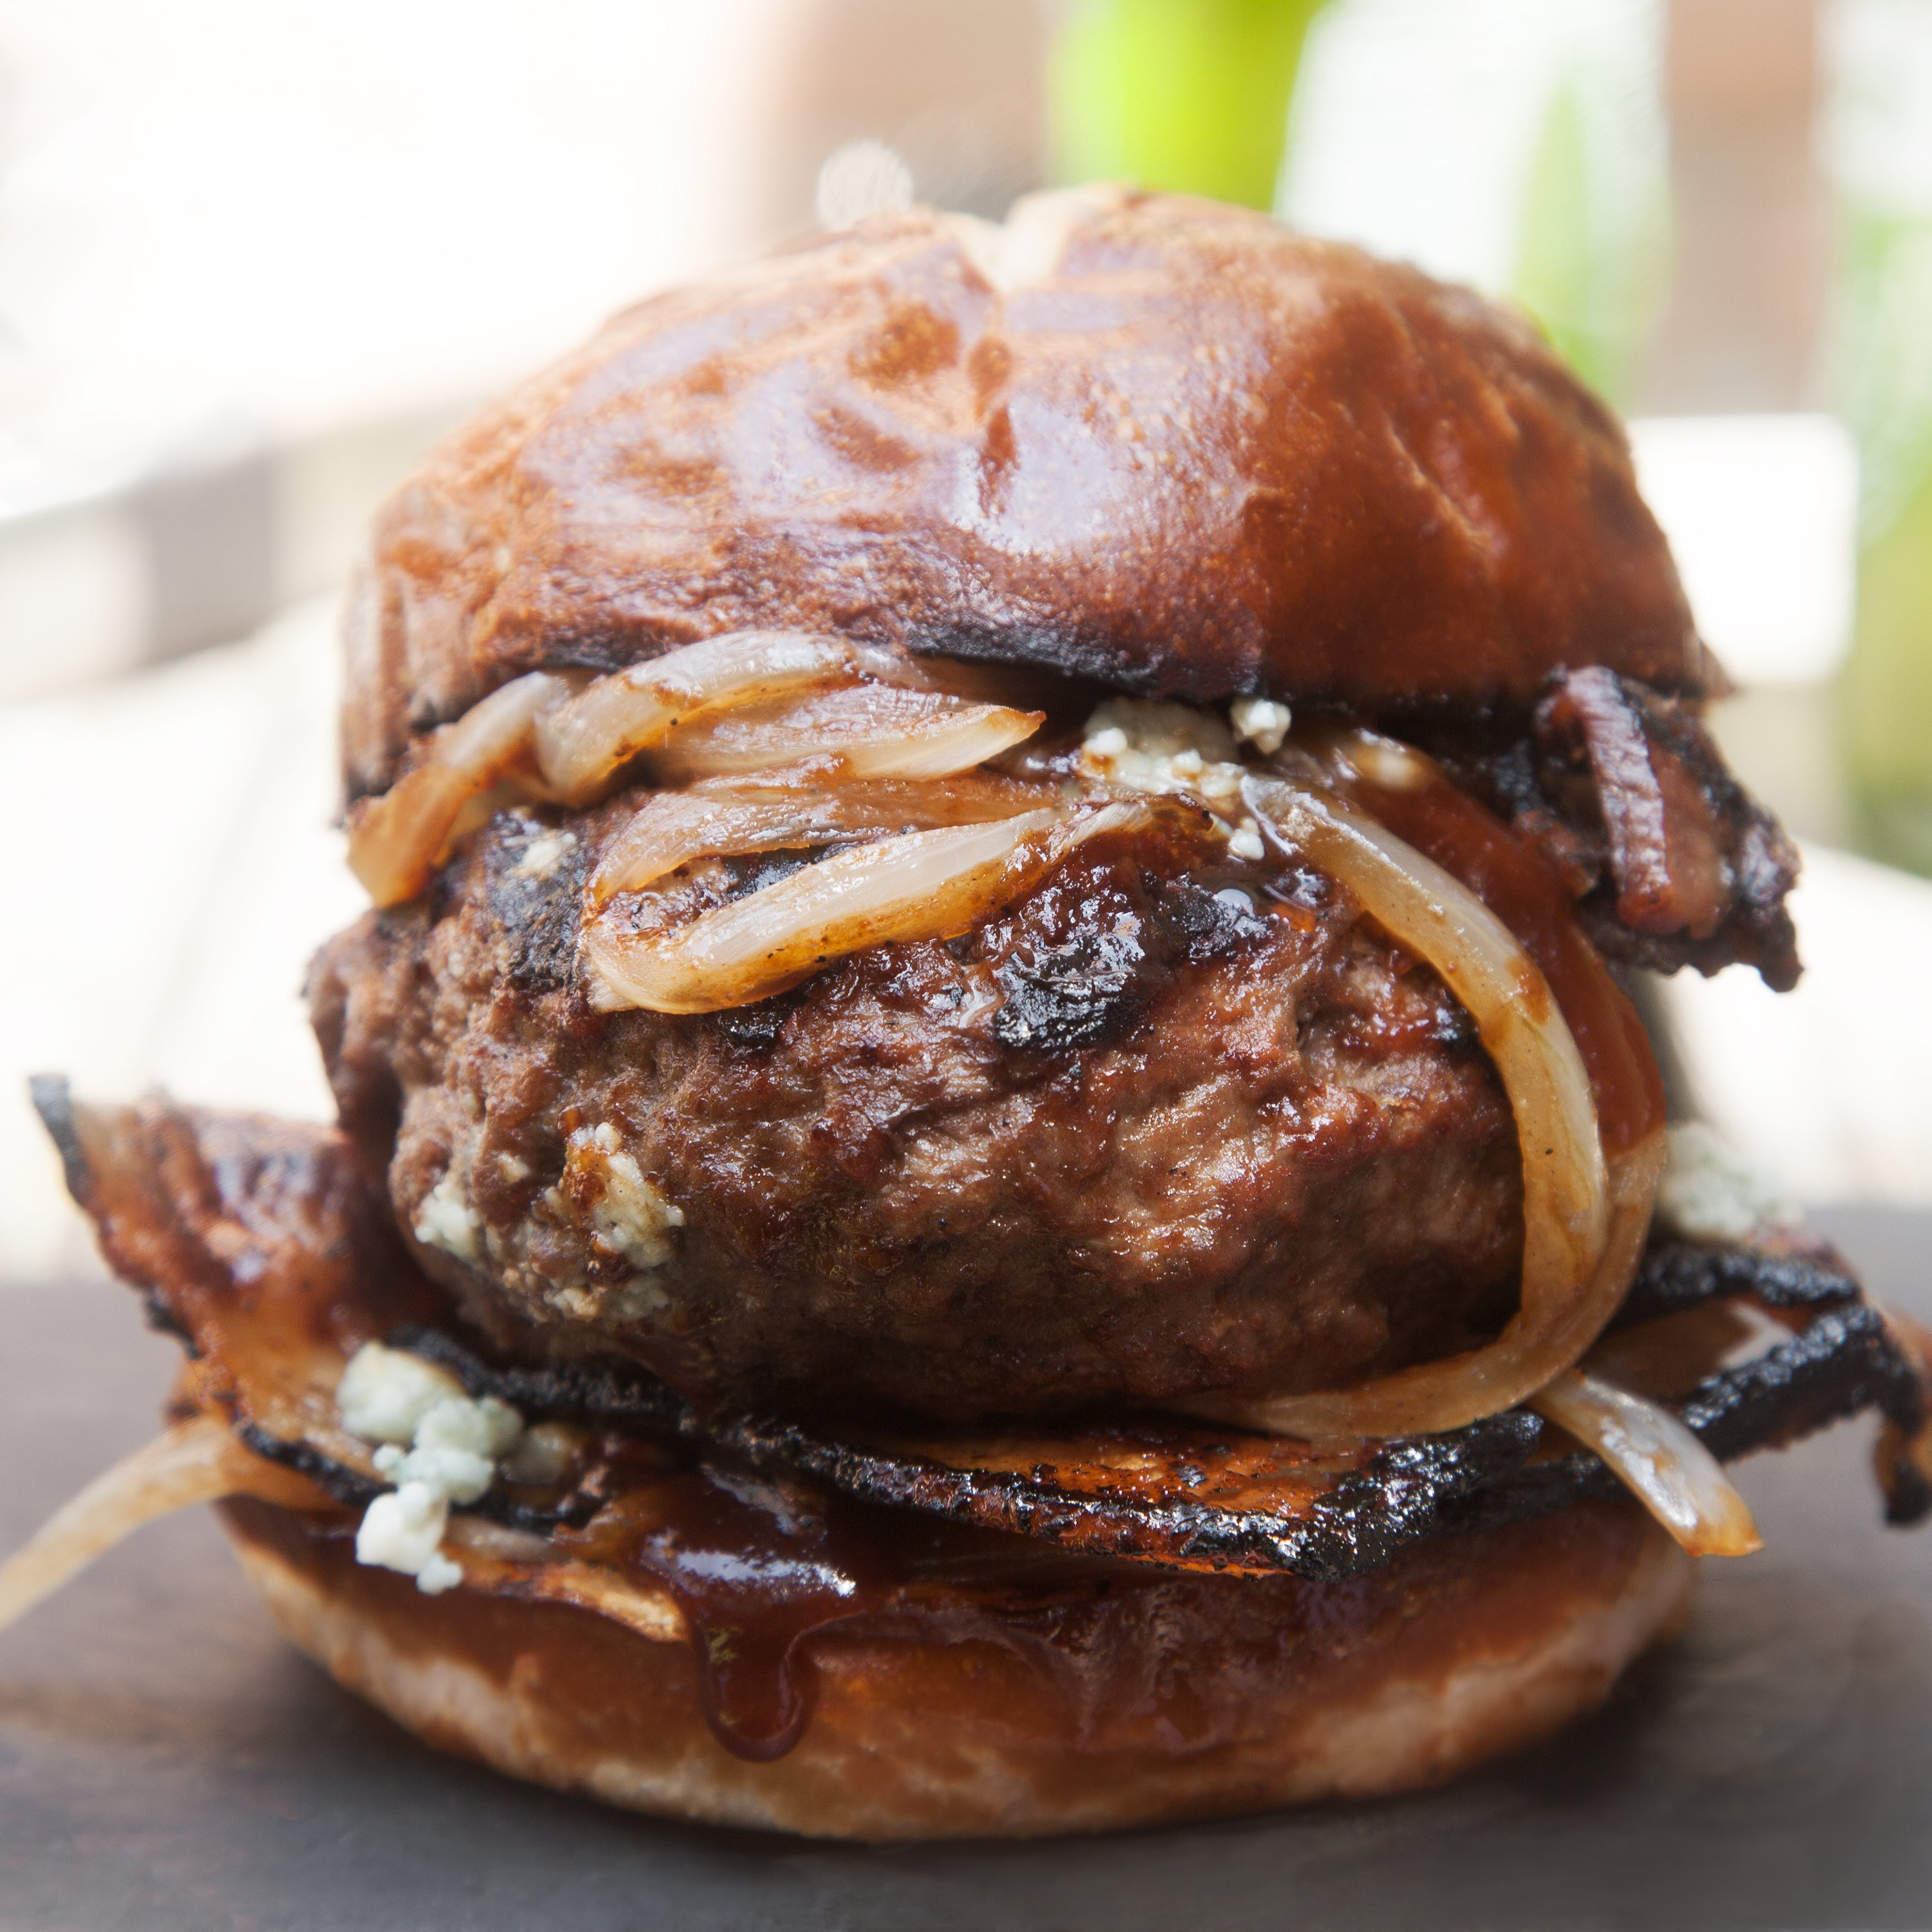 Grilled Bacon Burgers with Caramelized Onions and Blue Cheese